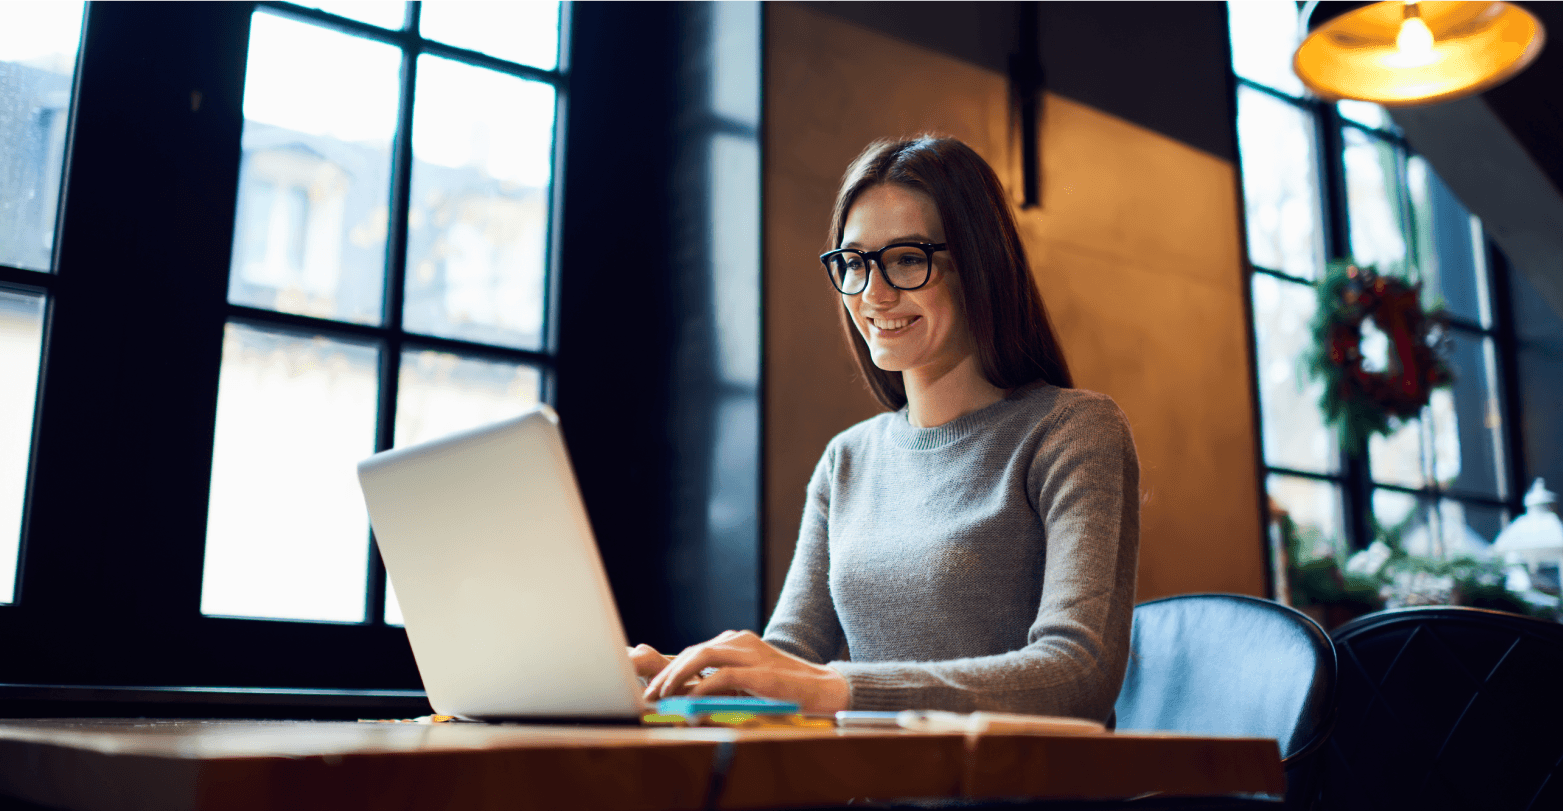 Women wearing glasses and smiling on laptop